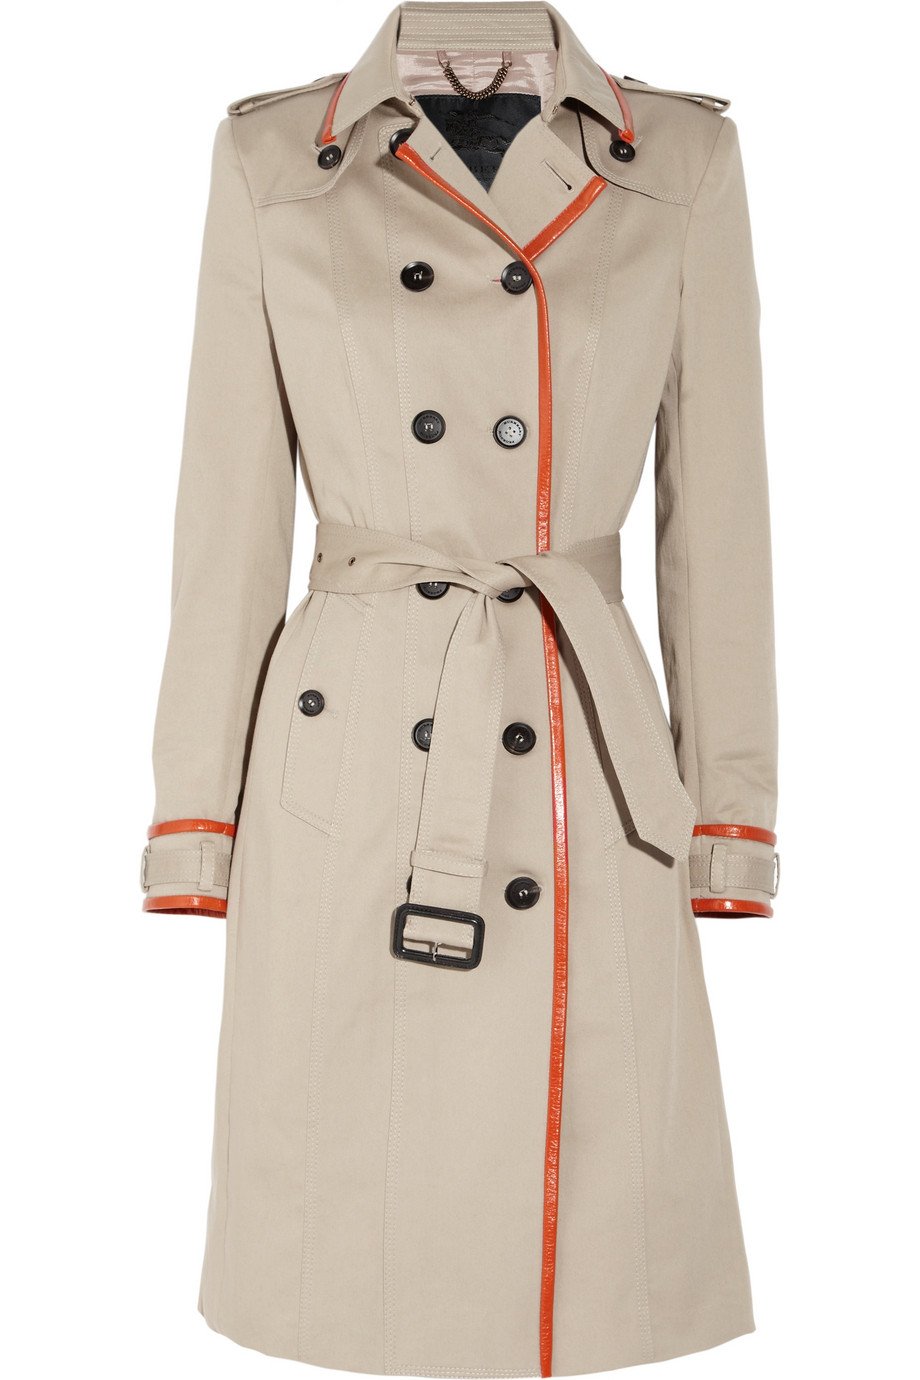 Lyst Burberry Prorsum Leather Trimmed Cotton Gabardine Trench Coat In Natural